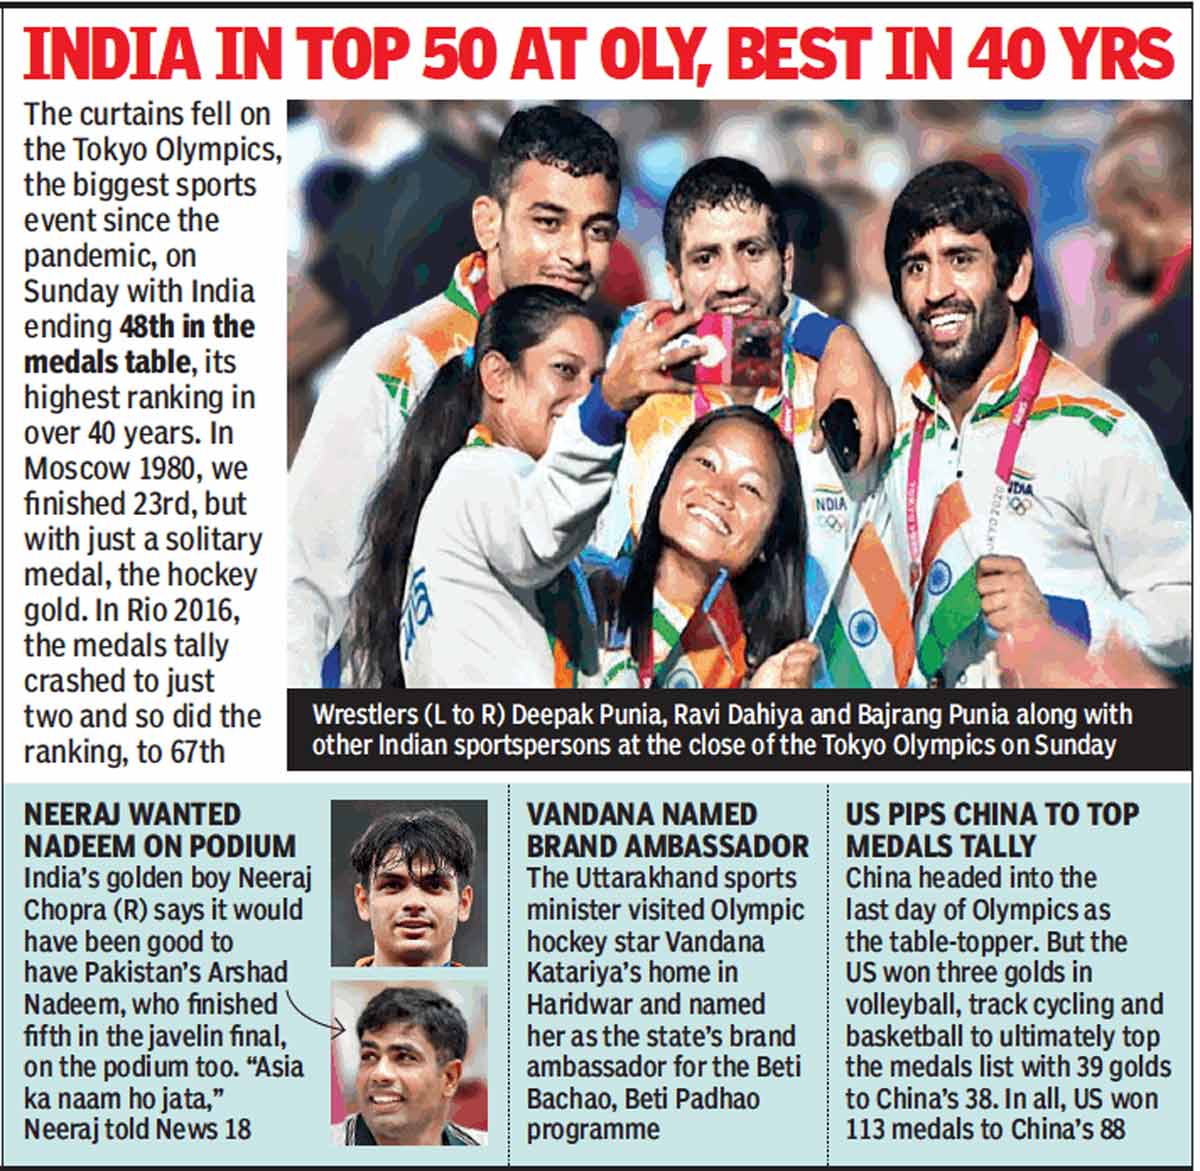 India Medals In Olympics 21 India Finishes 48th Best In Four Decades 33rd In Terms Of Overall Medals Won Tokyo Olympics News Times Of India